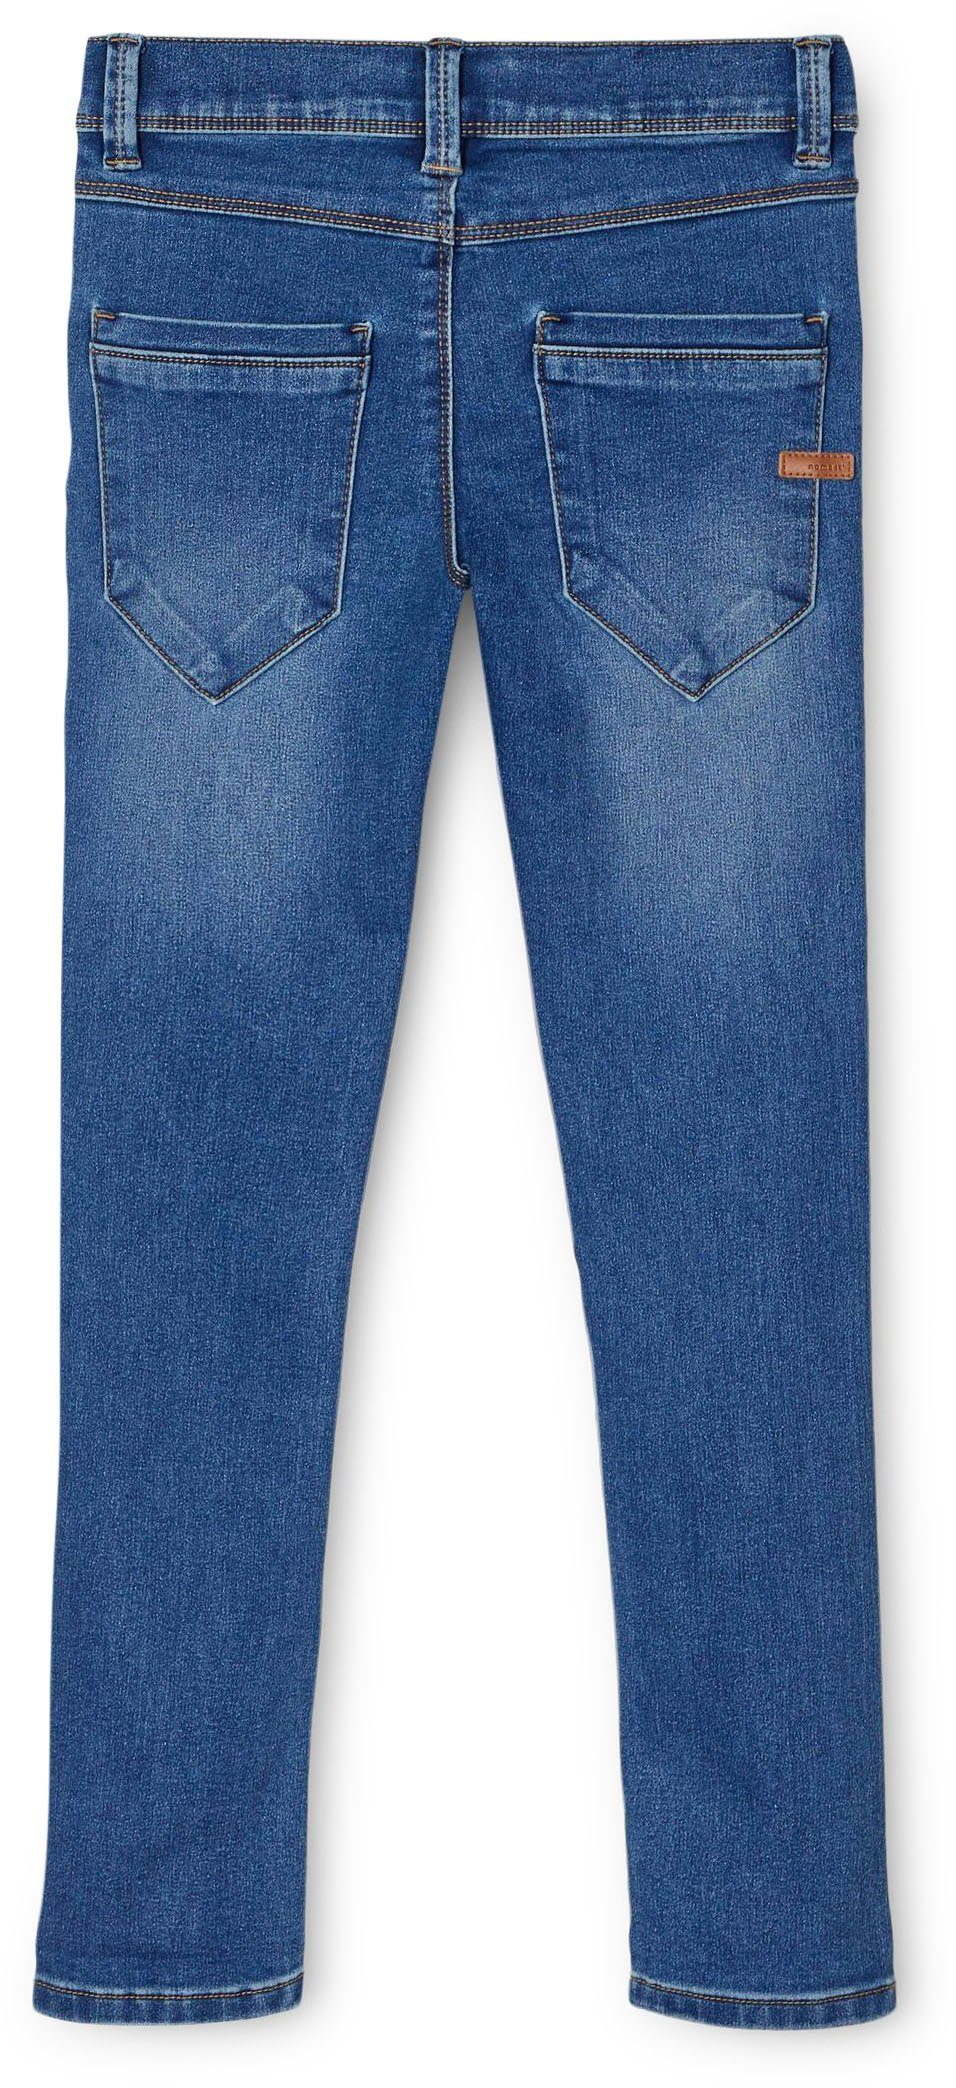 NKMSILAS It Name medium DNMTAX PANT Stretch-Jeans blue